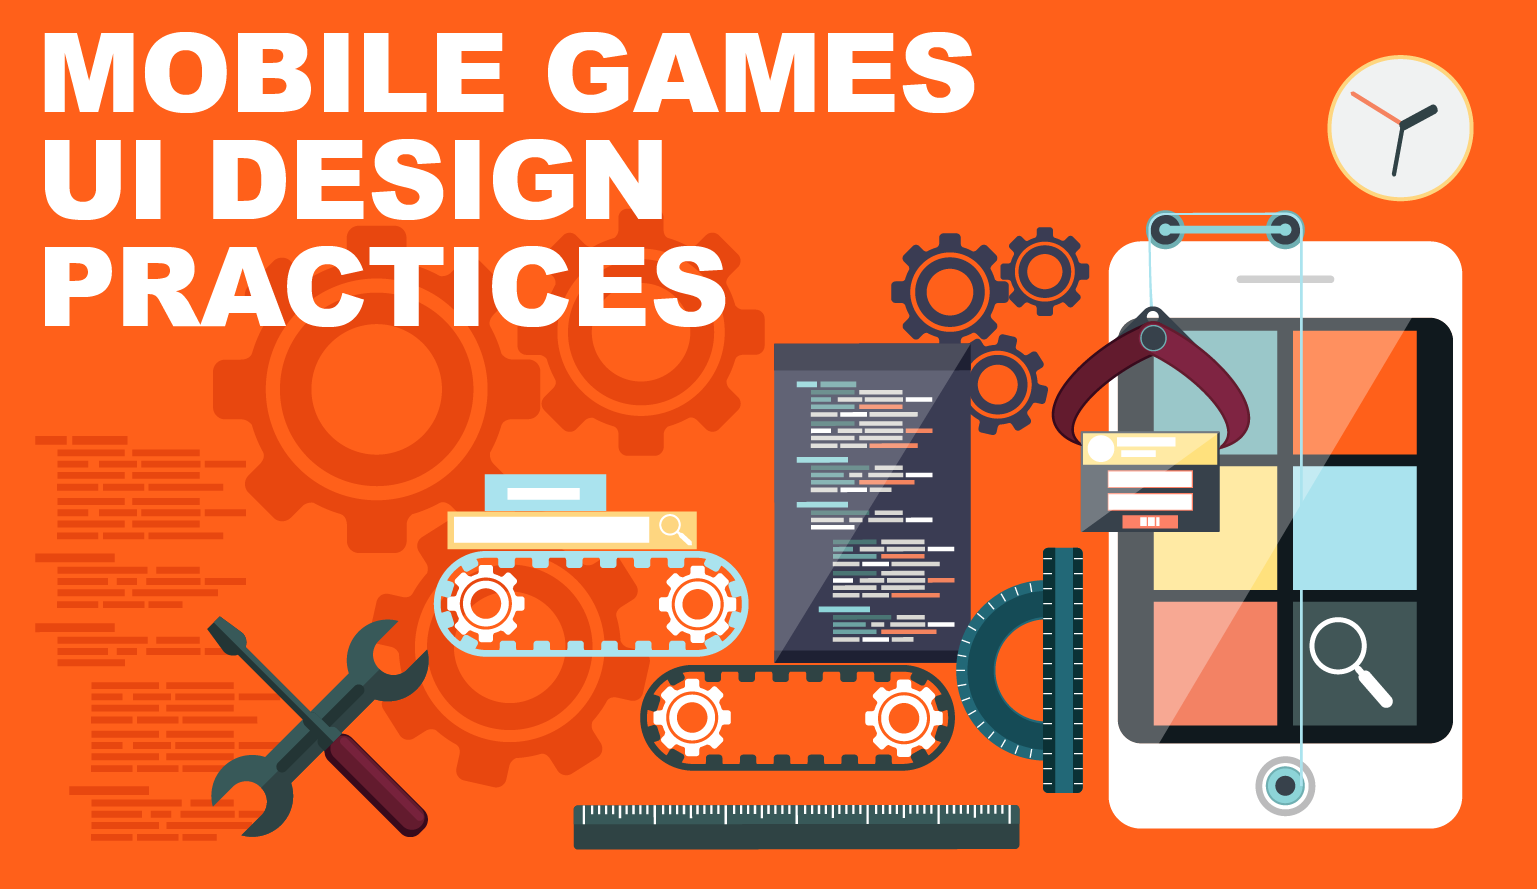 Mobile Game User Interface design Best Practices